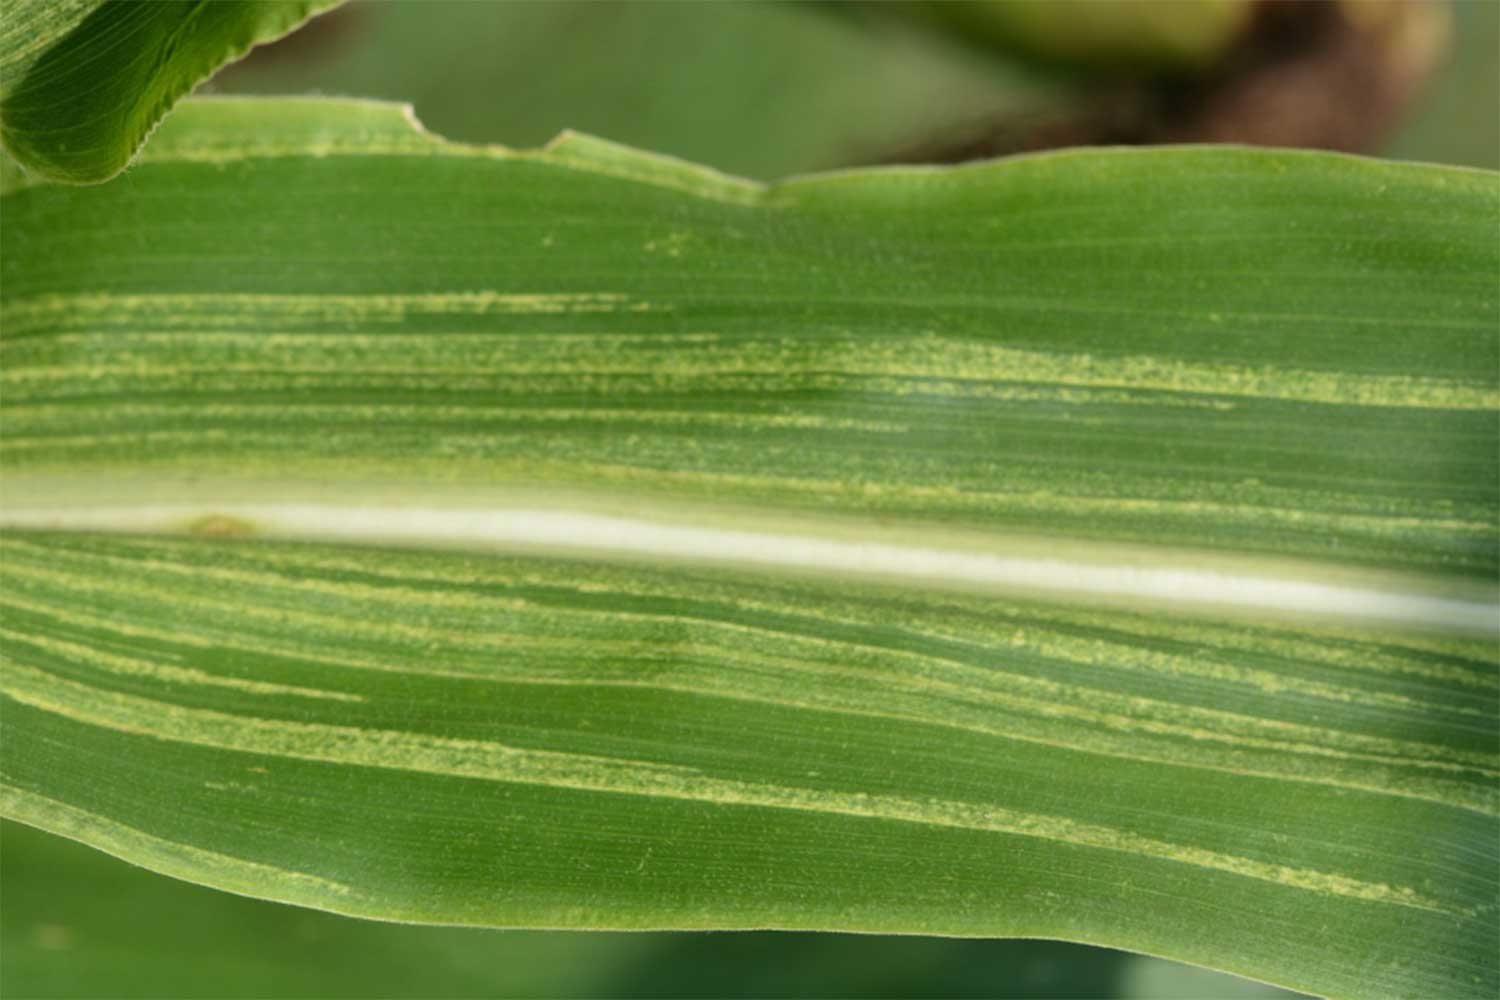 Green corn leaf with white stripes running along blade indicative of crazy top pathogen.